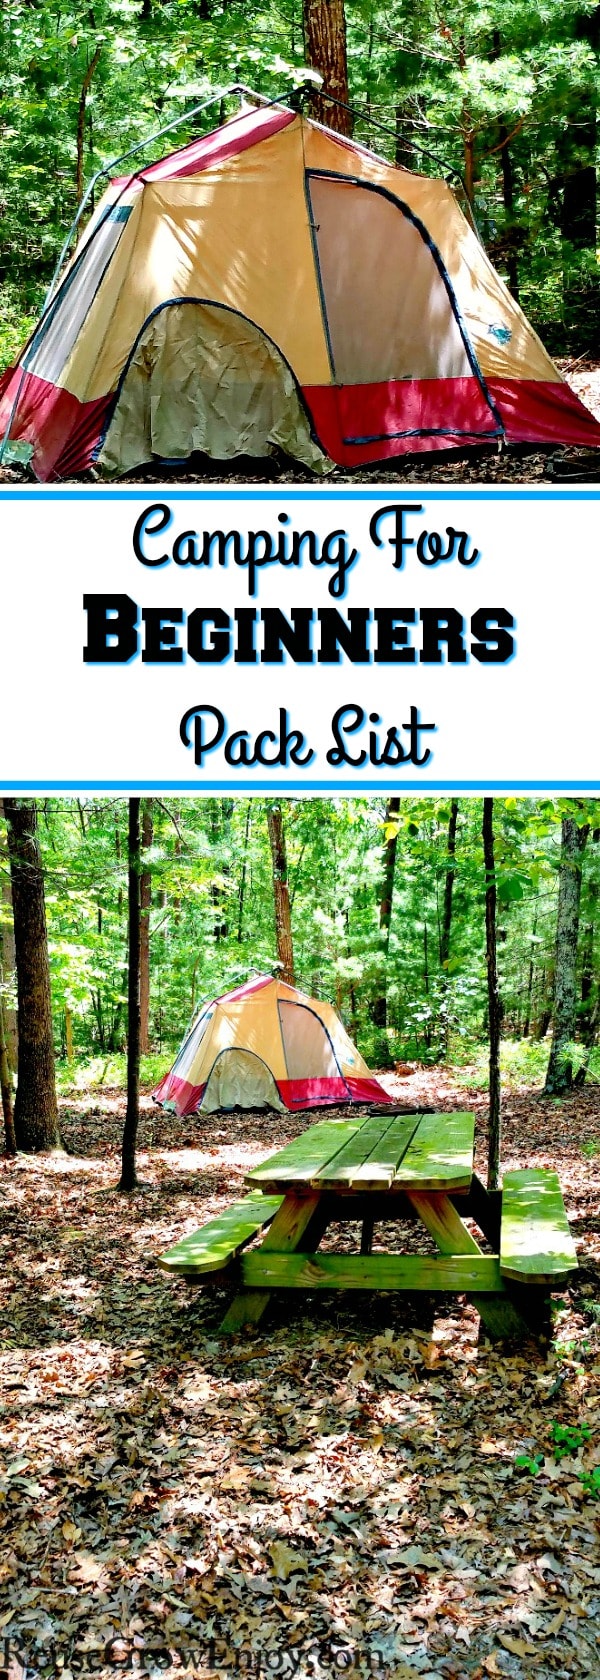 If you are just getting into camping then you may need to check out this pack list for camping for beginners. It has all the basics you will need to take!